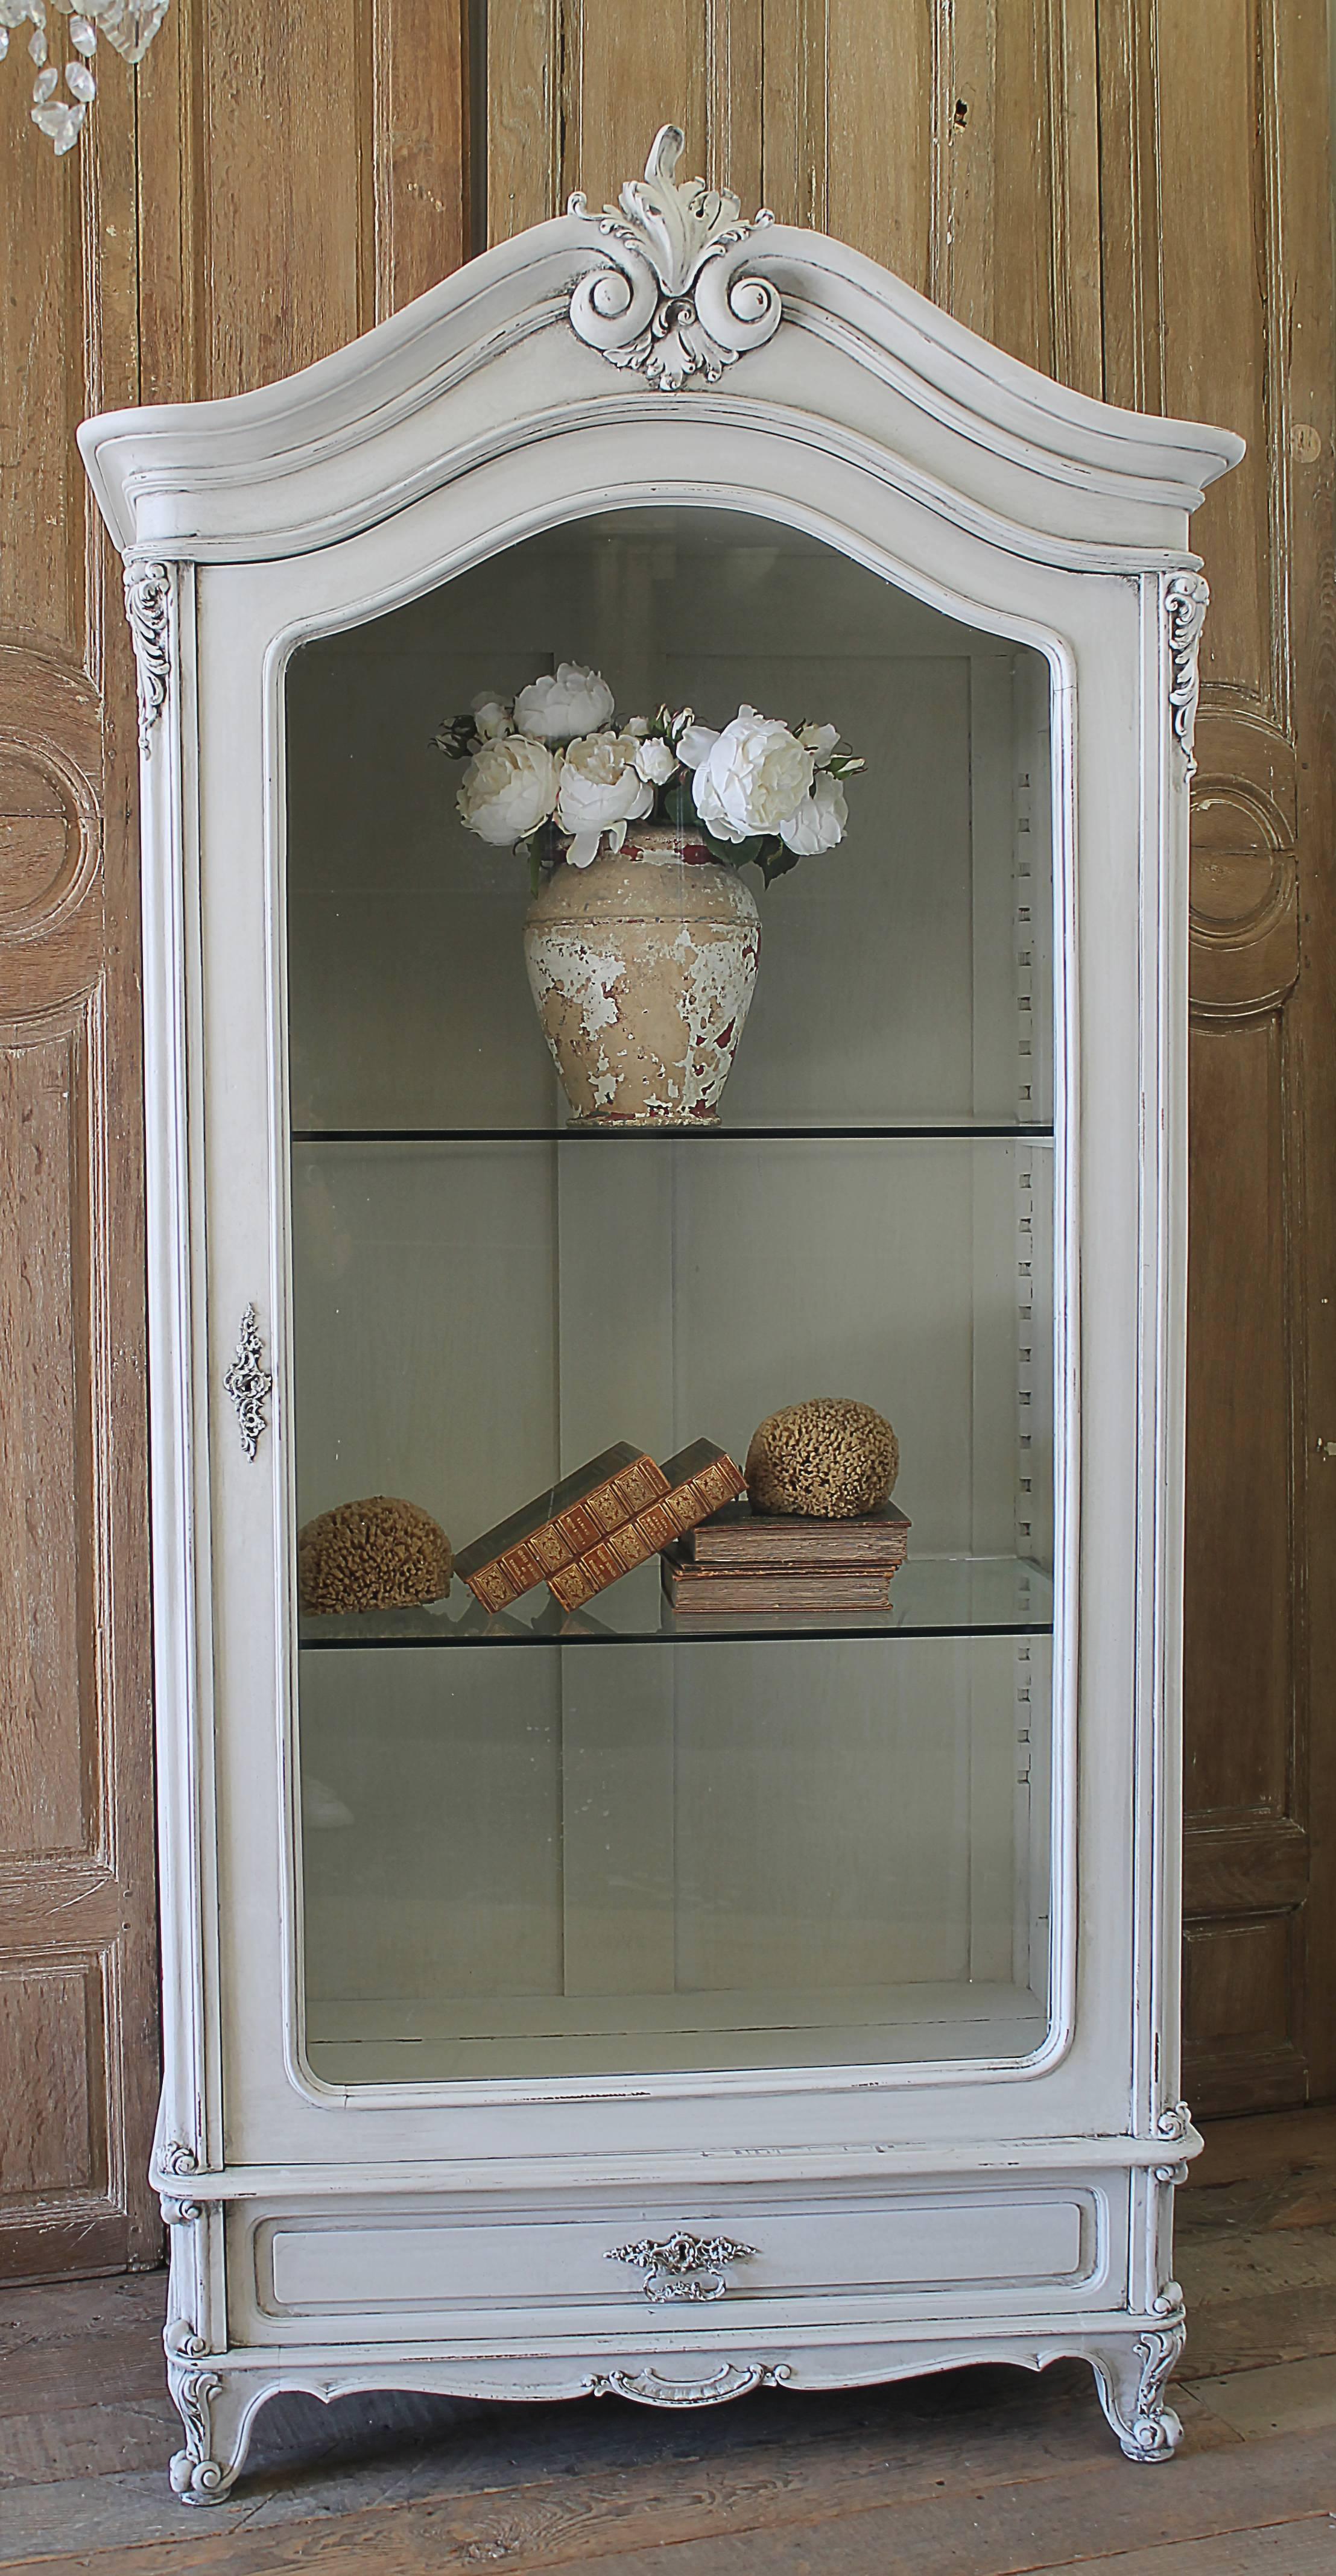 20th Century Petite French Display Armoire in the Louis XV style
We have painted this in a soft oyster white, with subtle areas of distress, and finished with an antique glaze. There are 2 adjustable glass shelves inside, and working drawer at the